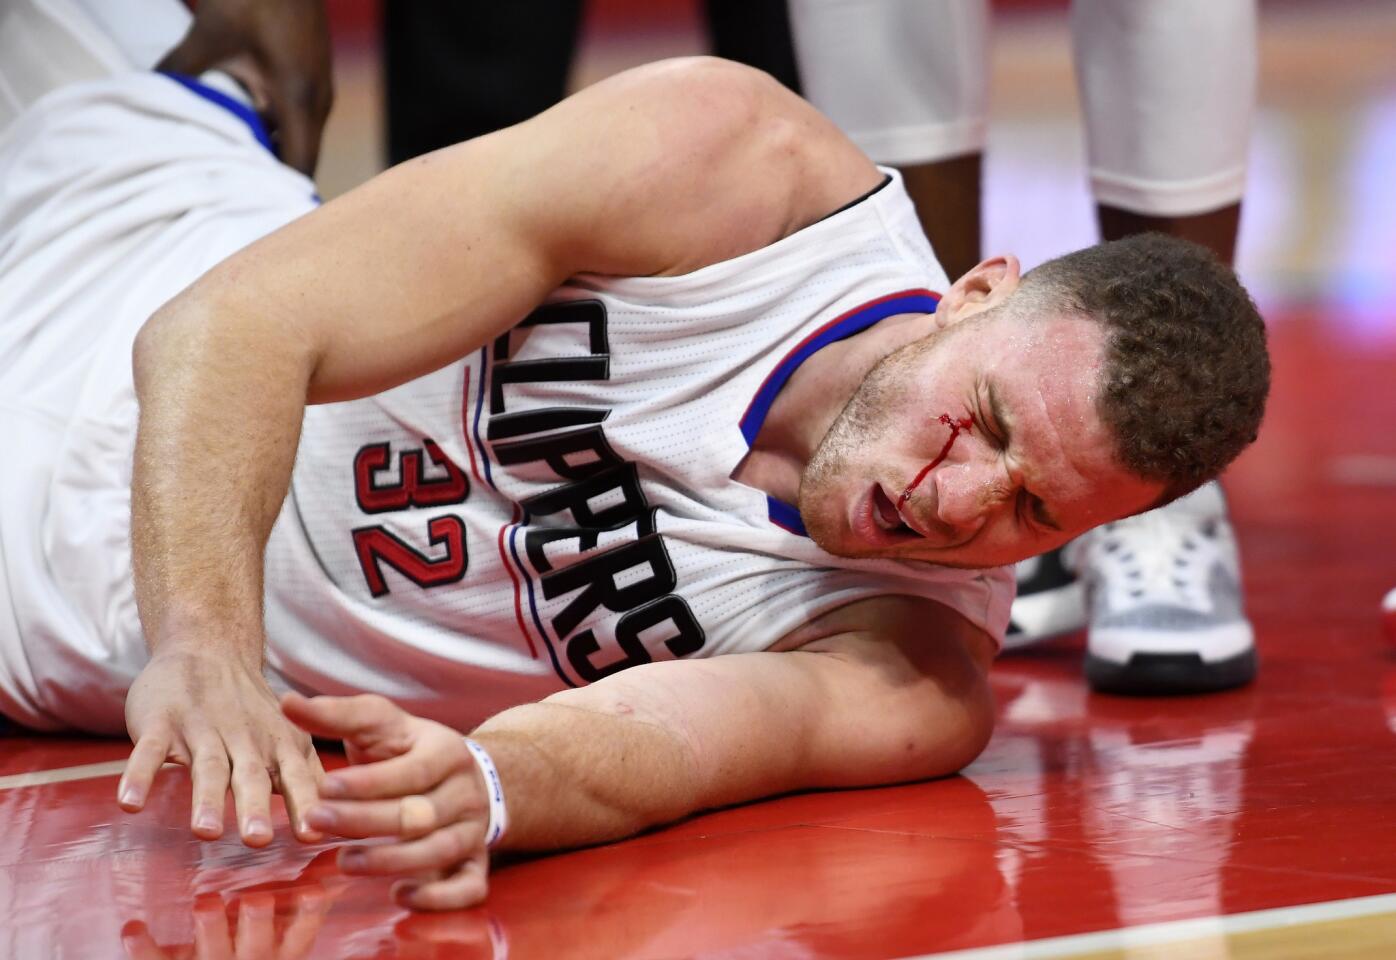 Clippers forward Blake Griffin writhes on the court after being fouled during the second half.